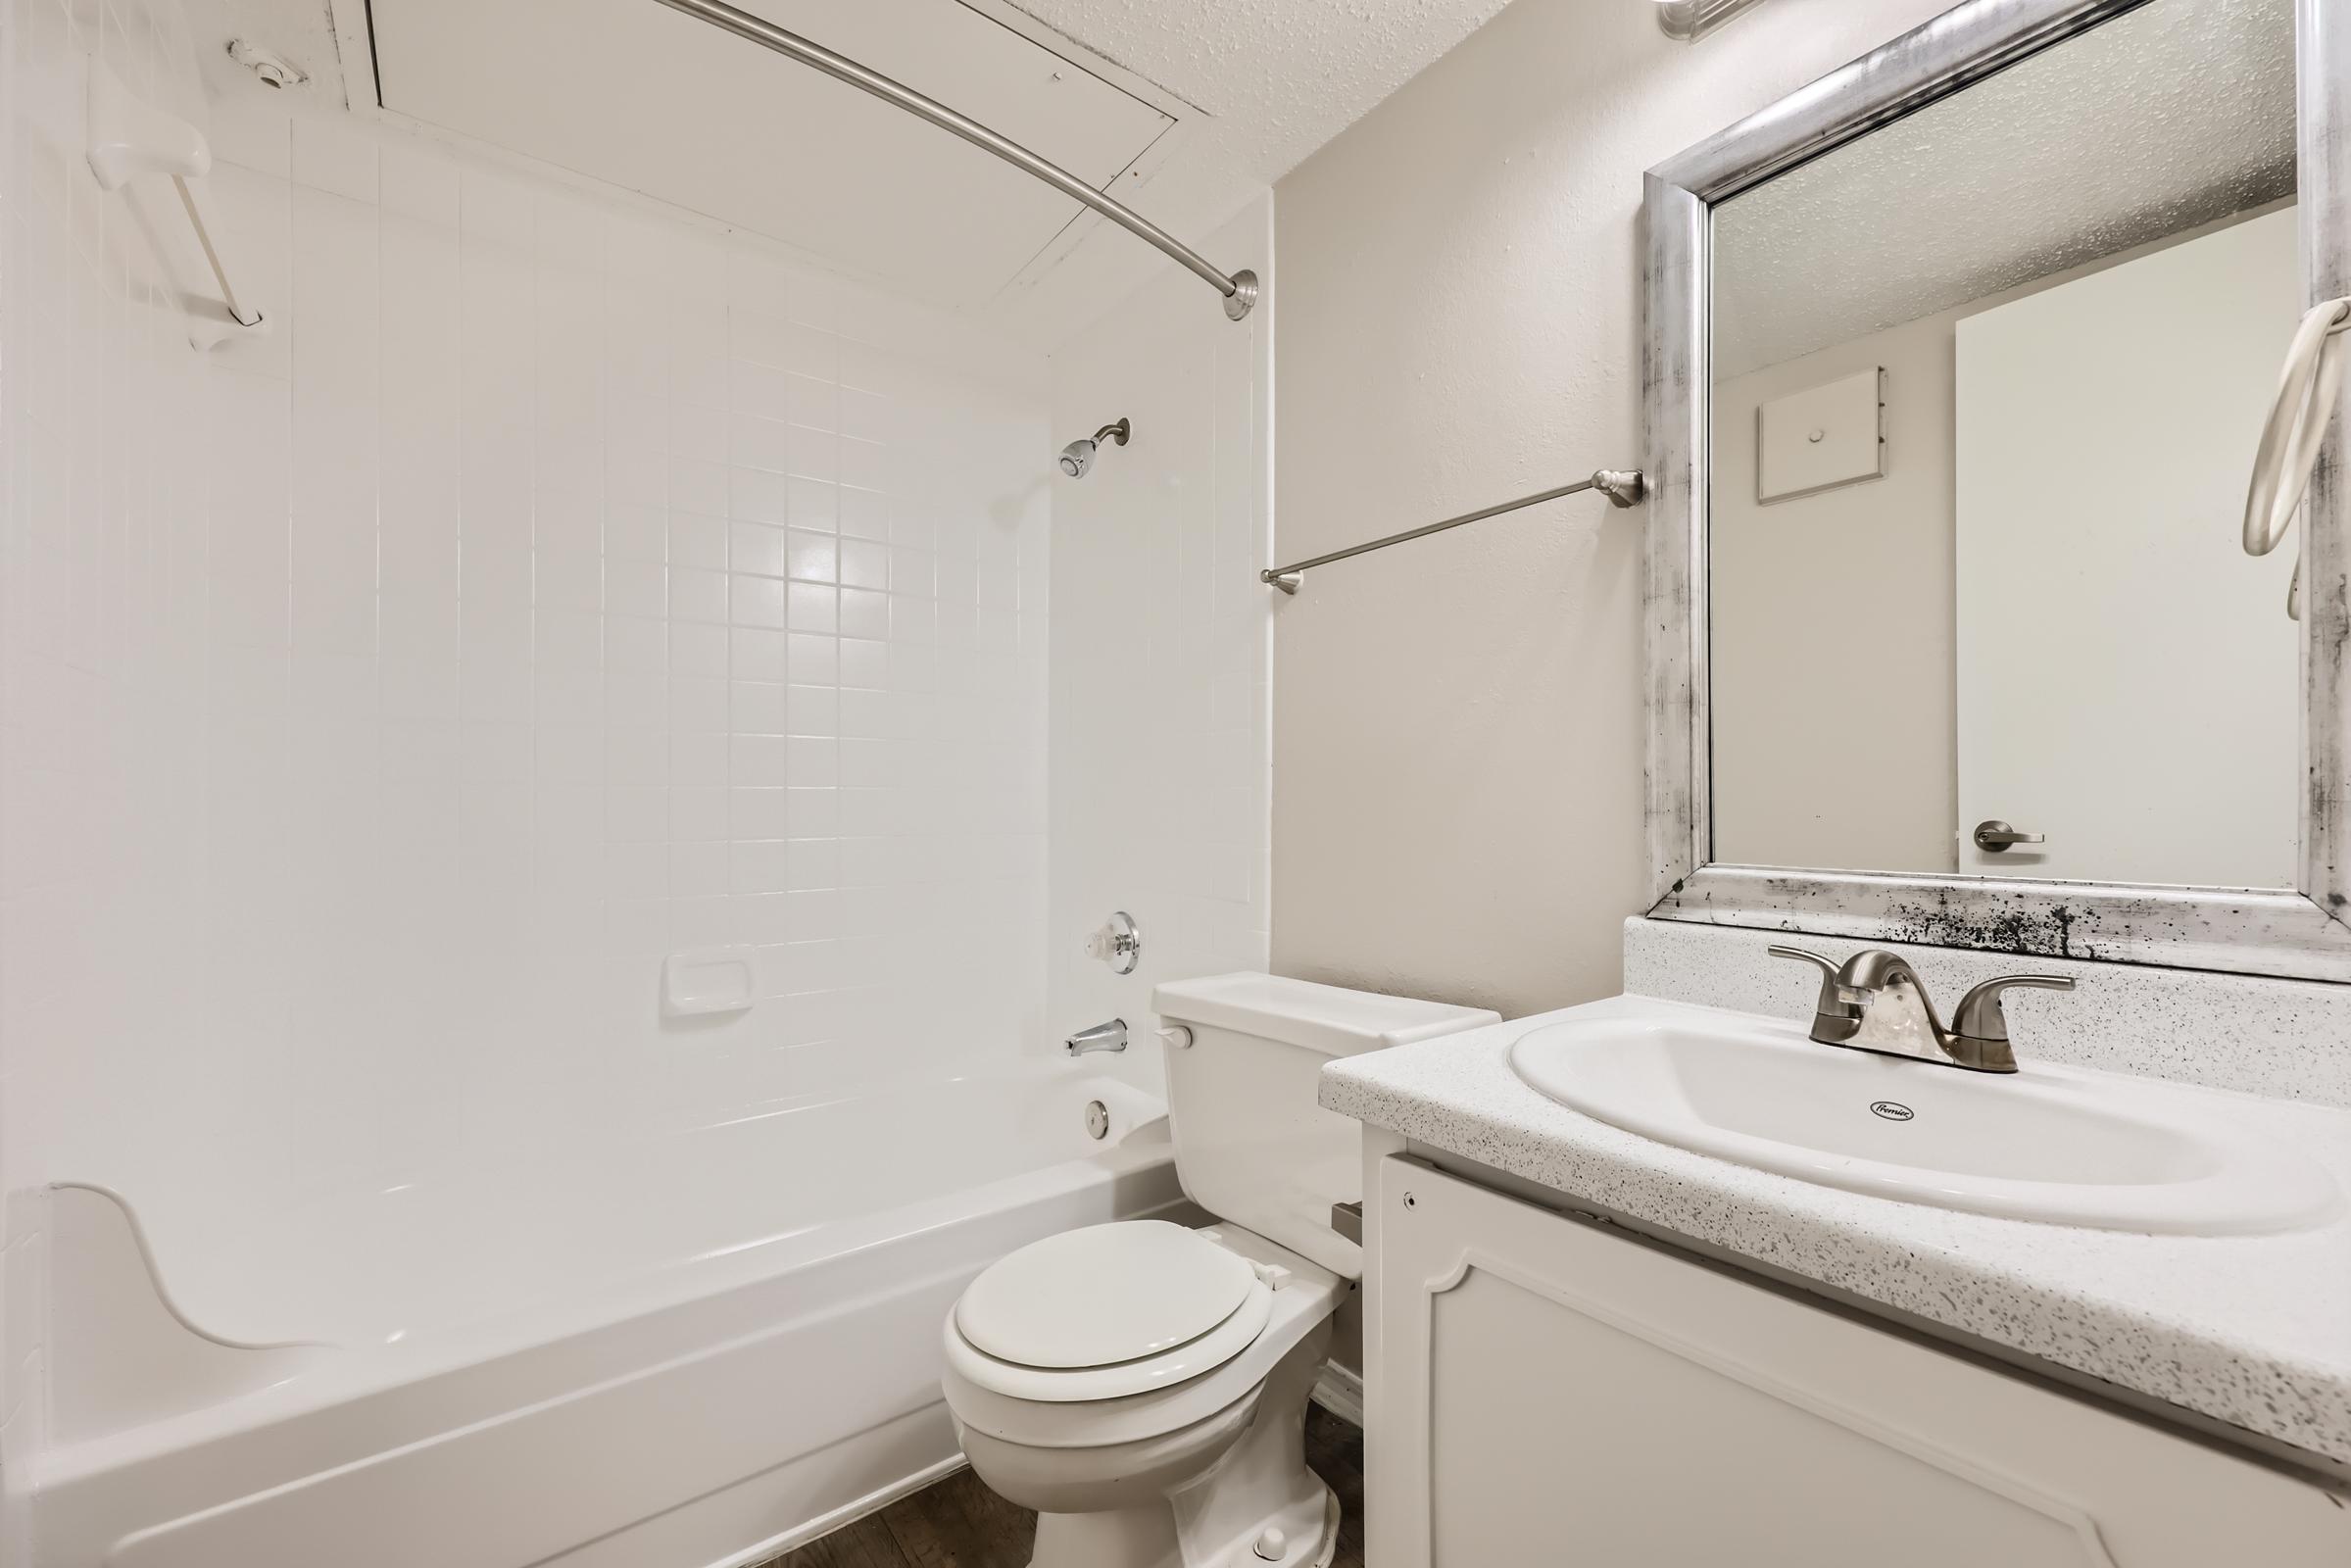 A bathroom with a shower, vanity, and mirror at Rise Oak Creek.